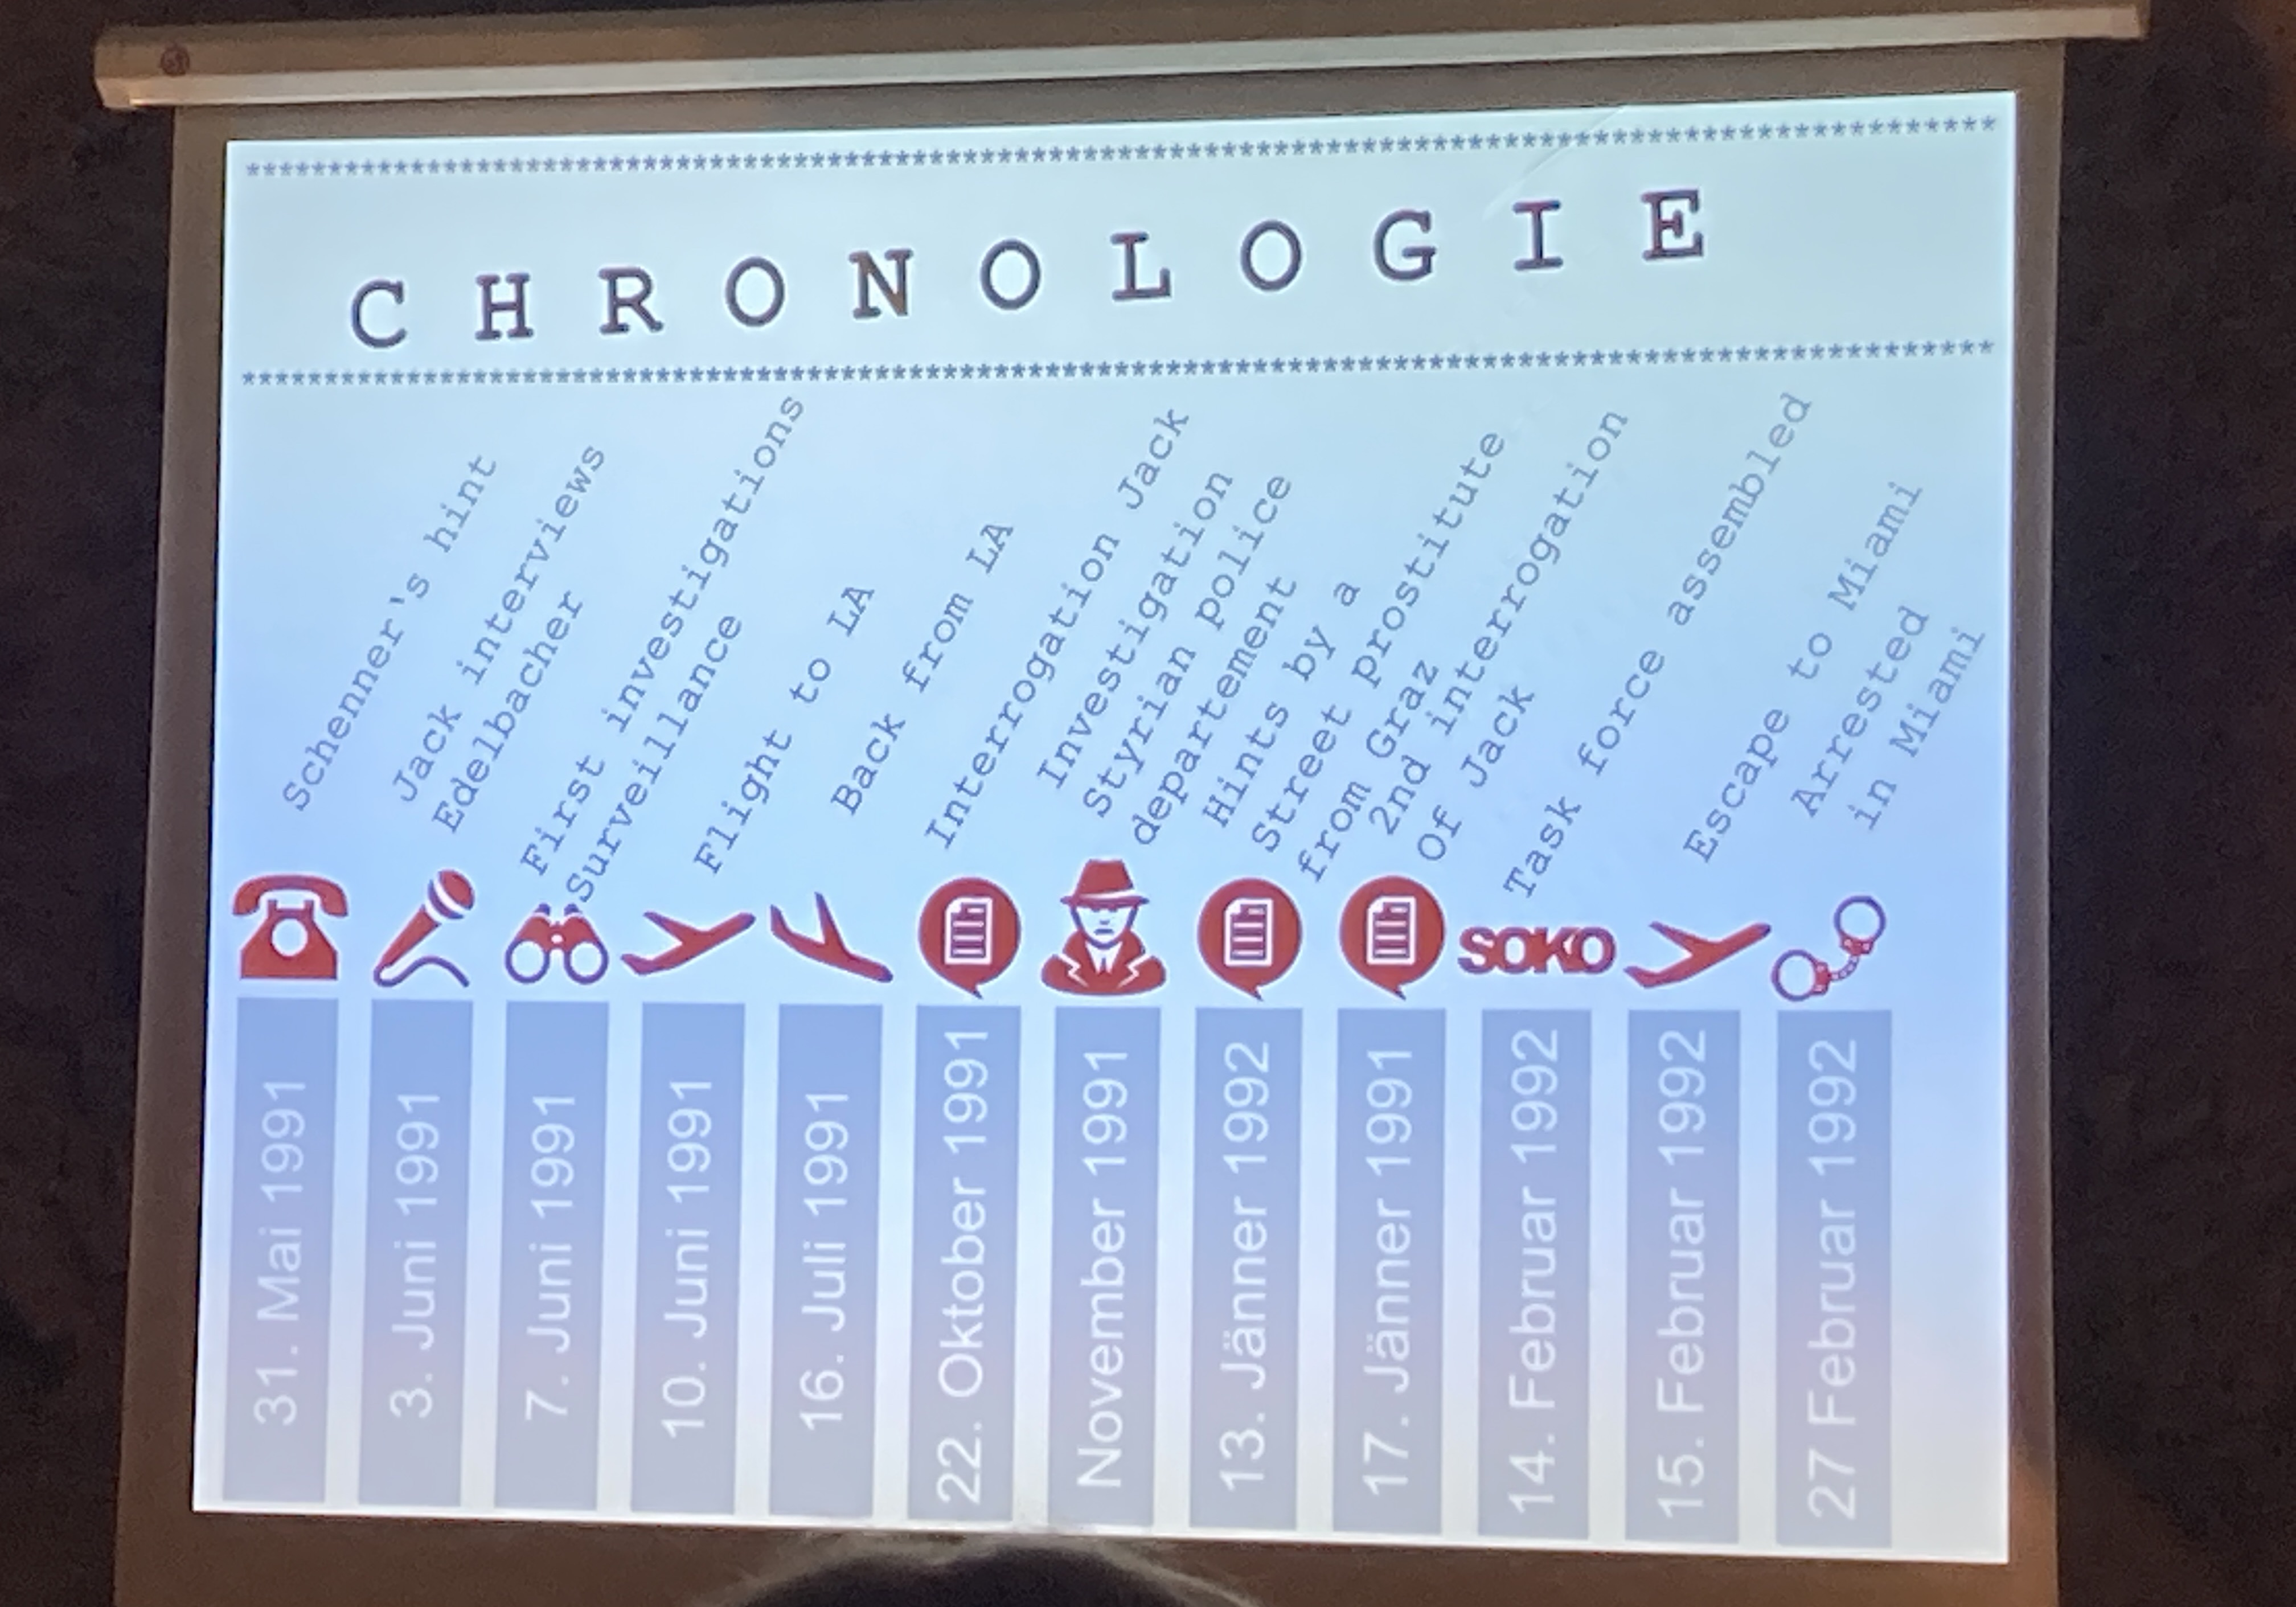 A photo of a projection of a timeline of events related to a serial killer's crimes, labeled "CHRONOLOGIE"